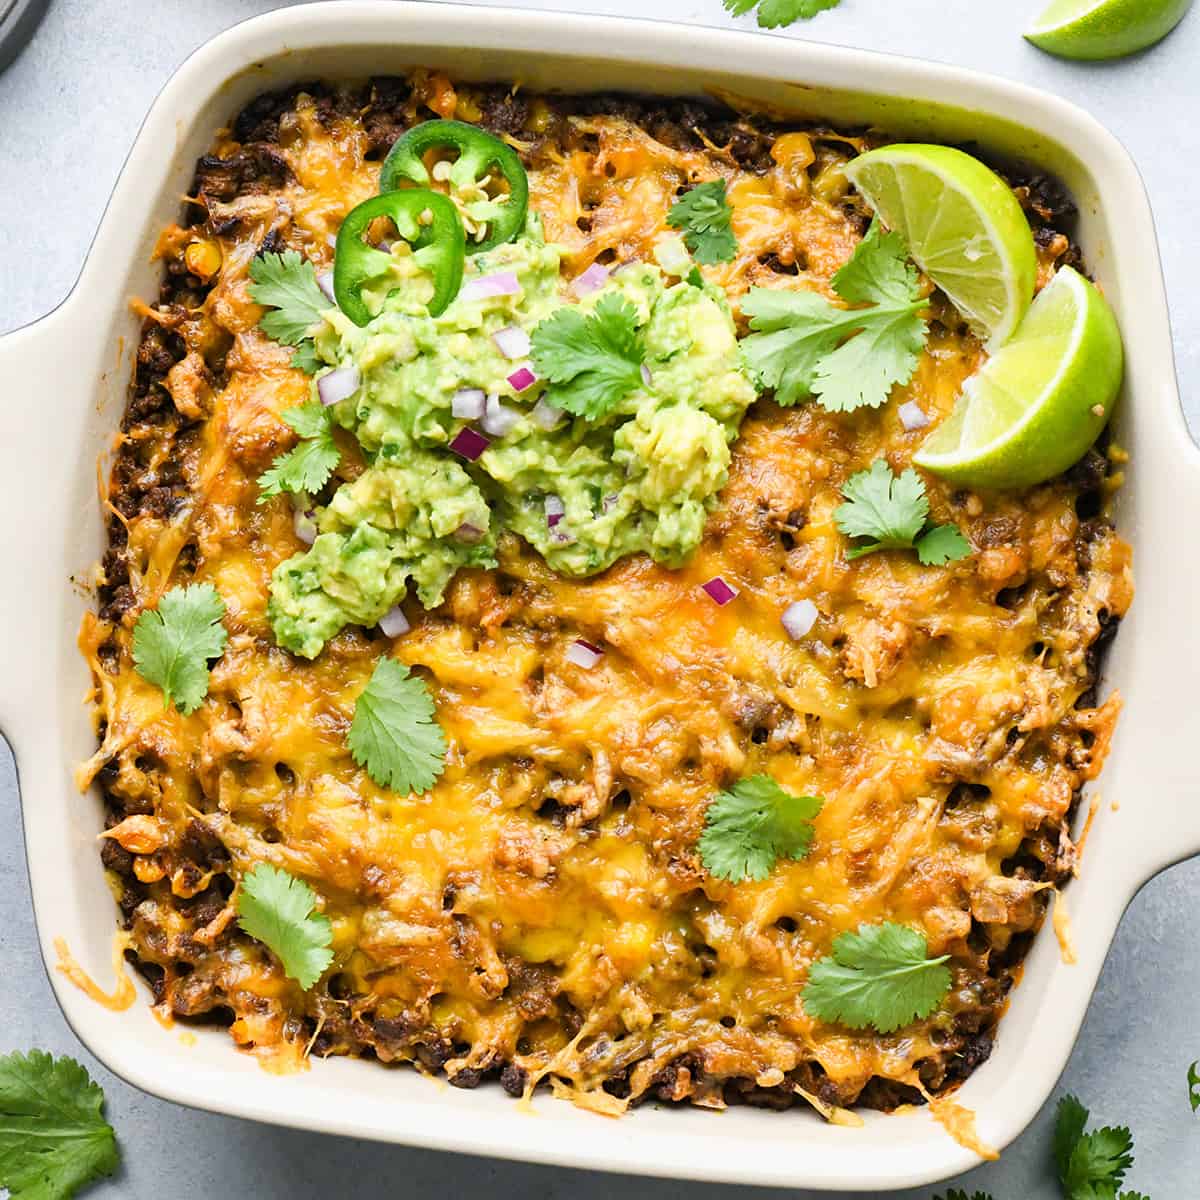 Mexican Casserole in a baking dish